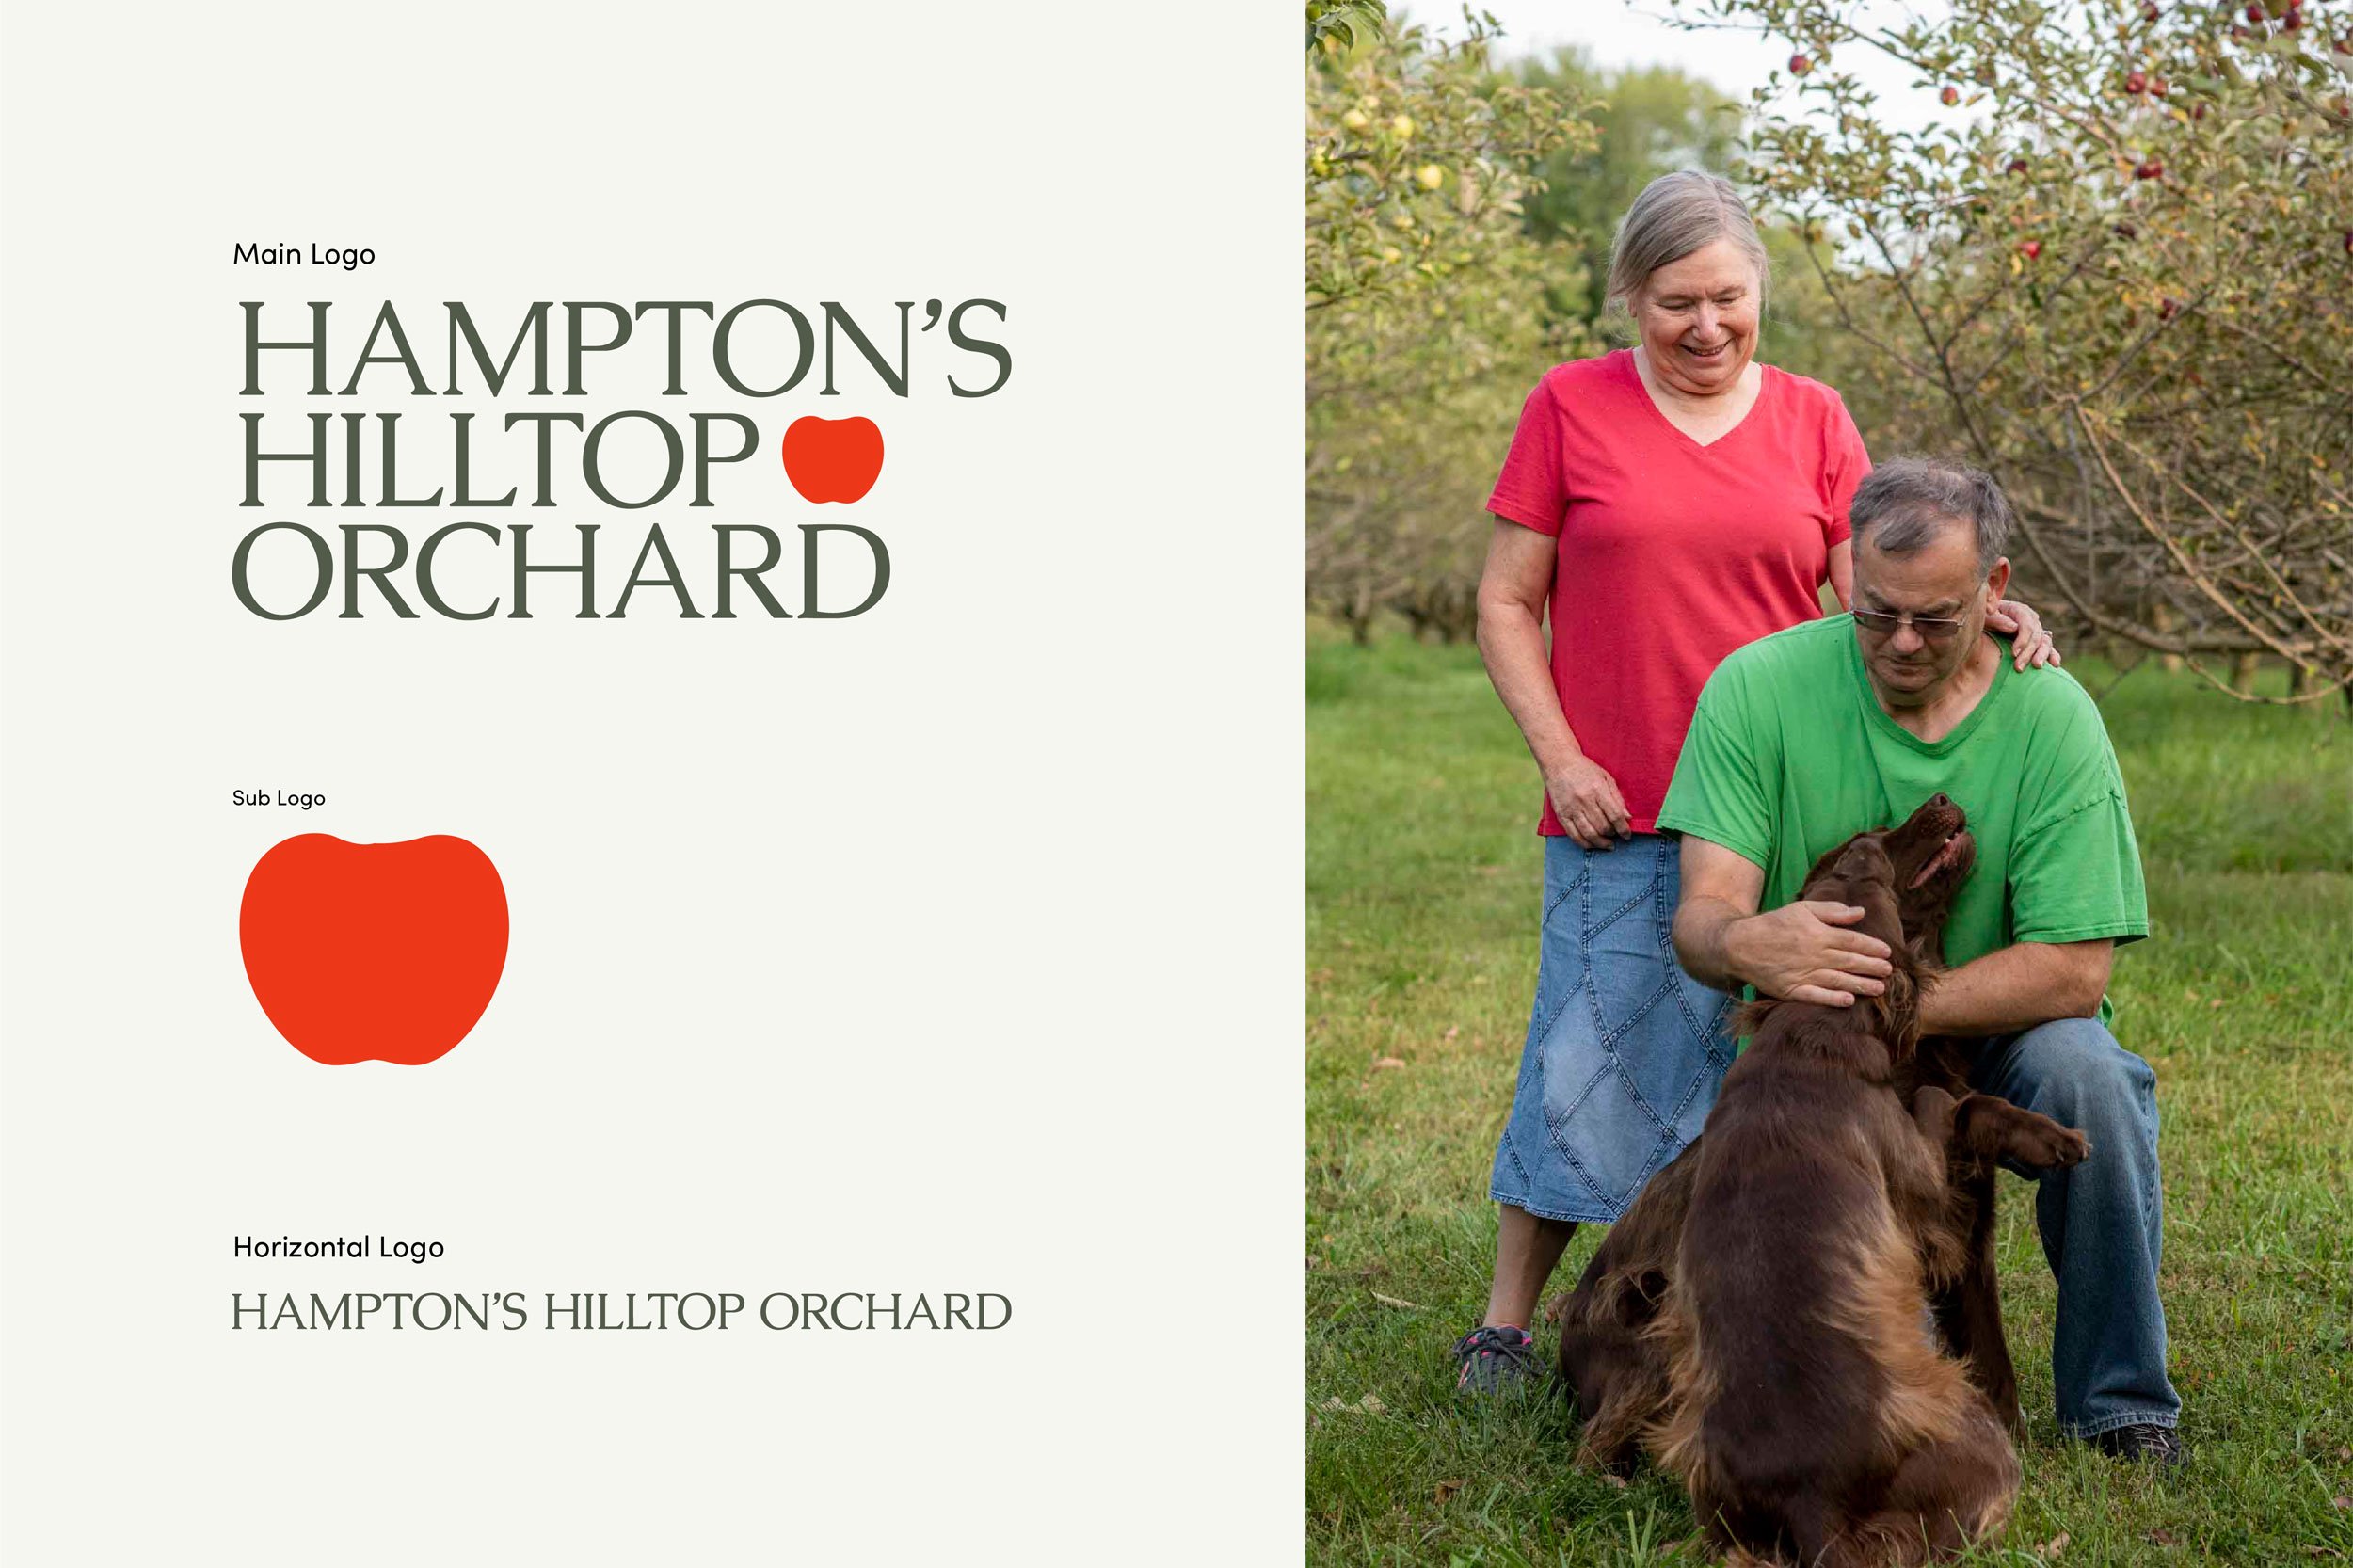  Hampton’s Hilltop Orchard logo, sublogo of an apple, and font family. 